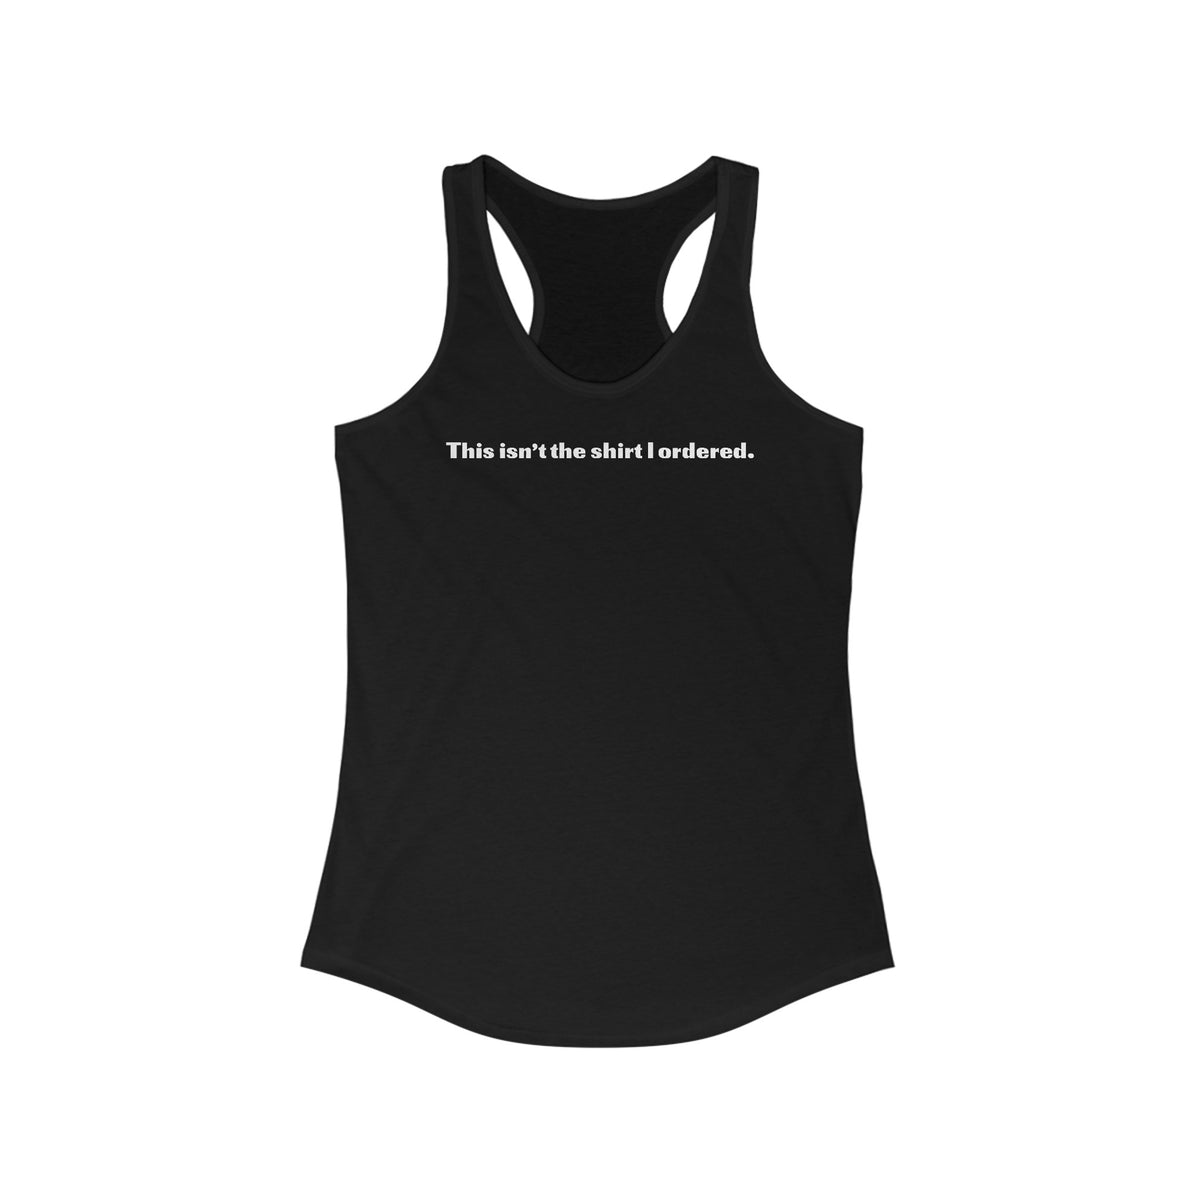 This Isn't The Shirt I Ordered. - Women's Racerback Tank